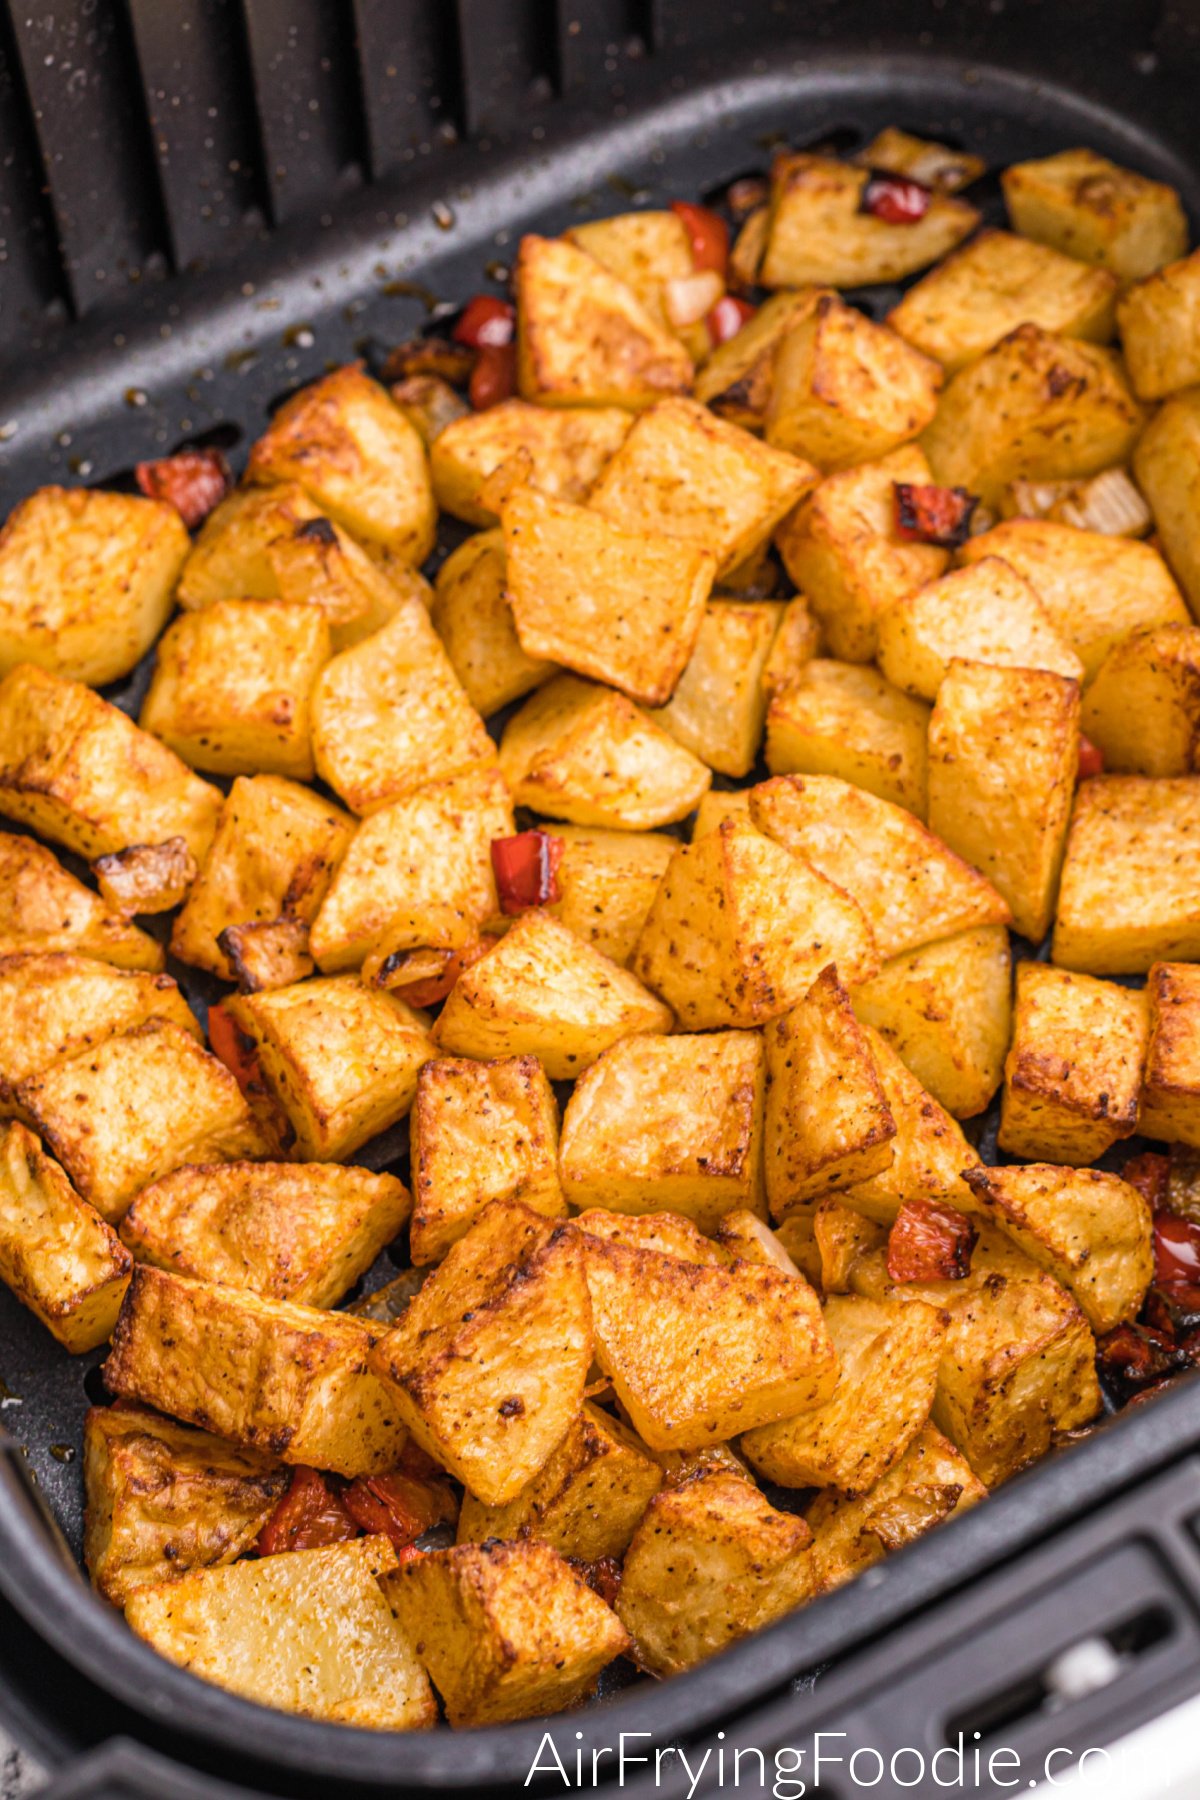 Home fries in air fryer basket, fully cooked and golden brown. 